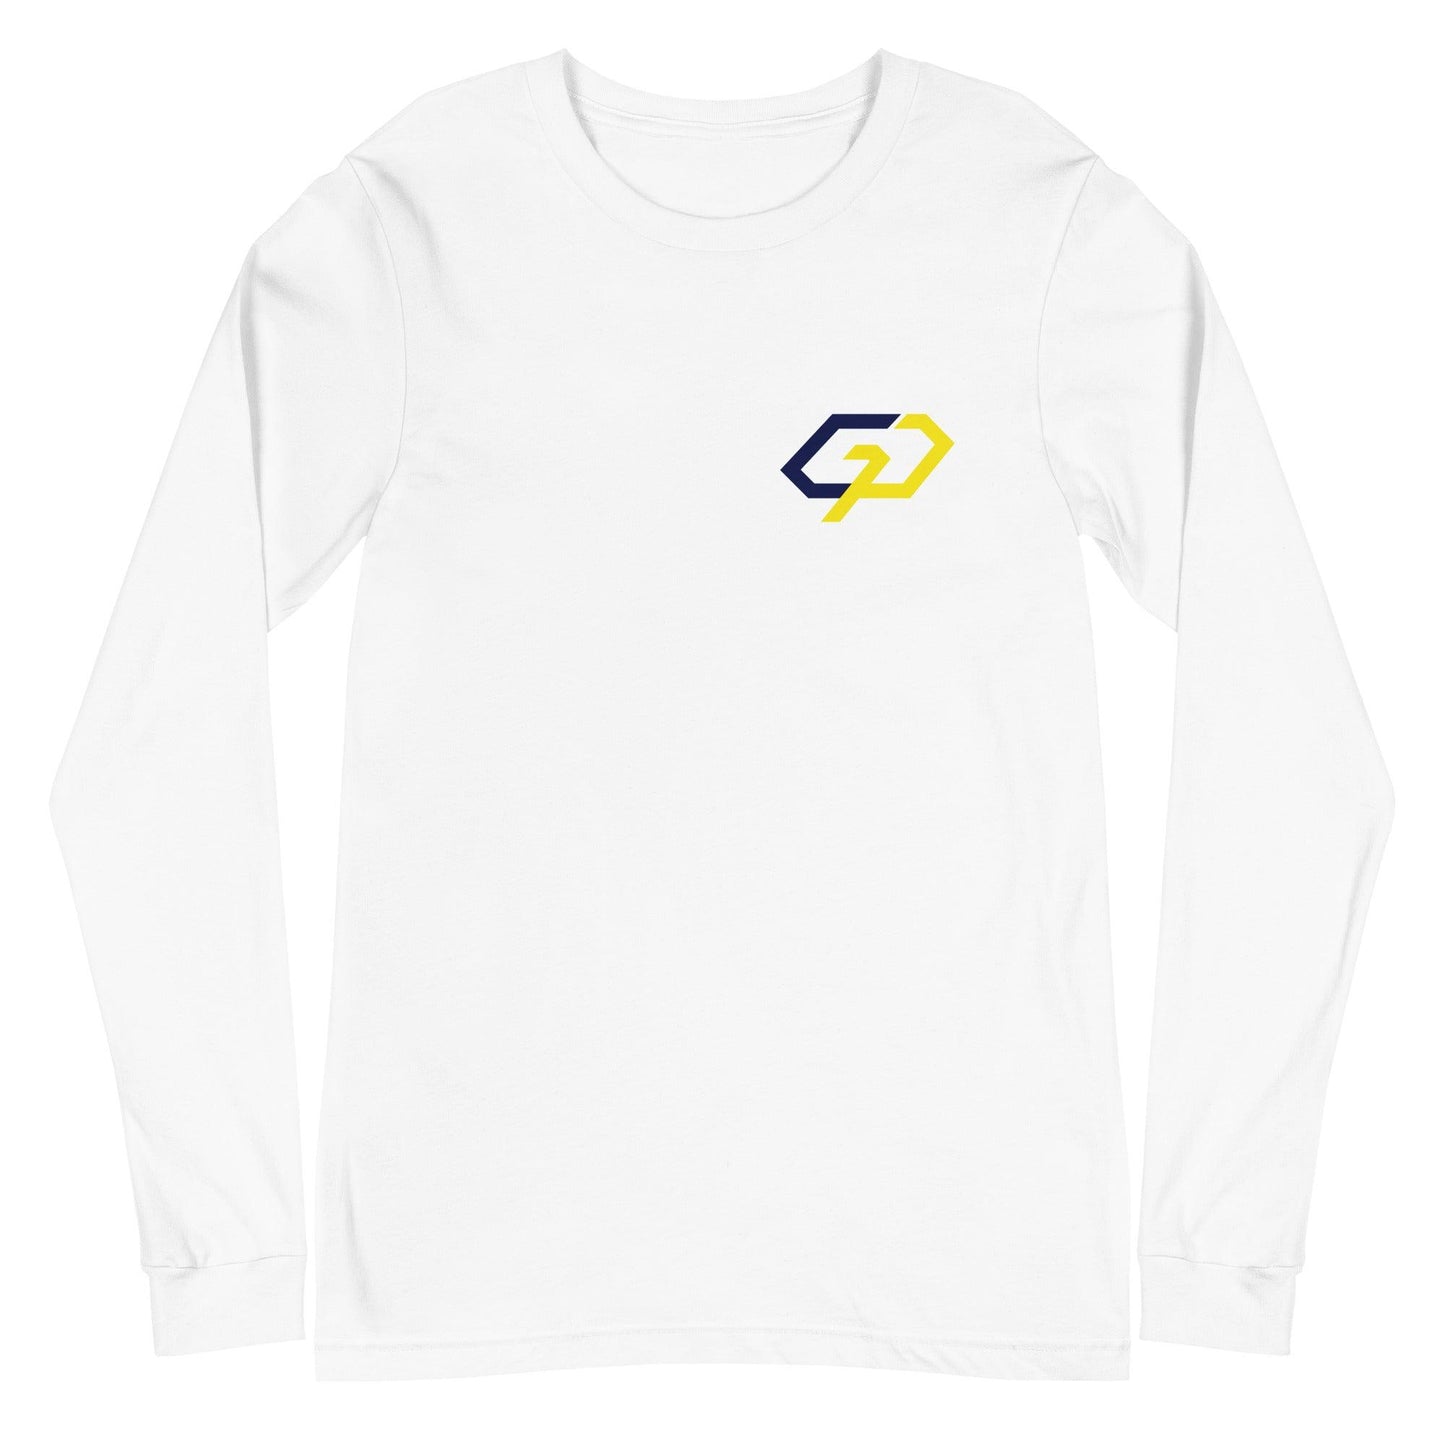 Gregory Pace "Signature" Long Sleeve Tee - Fan Arch